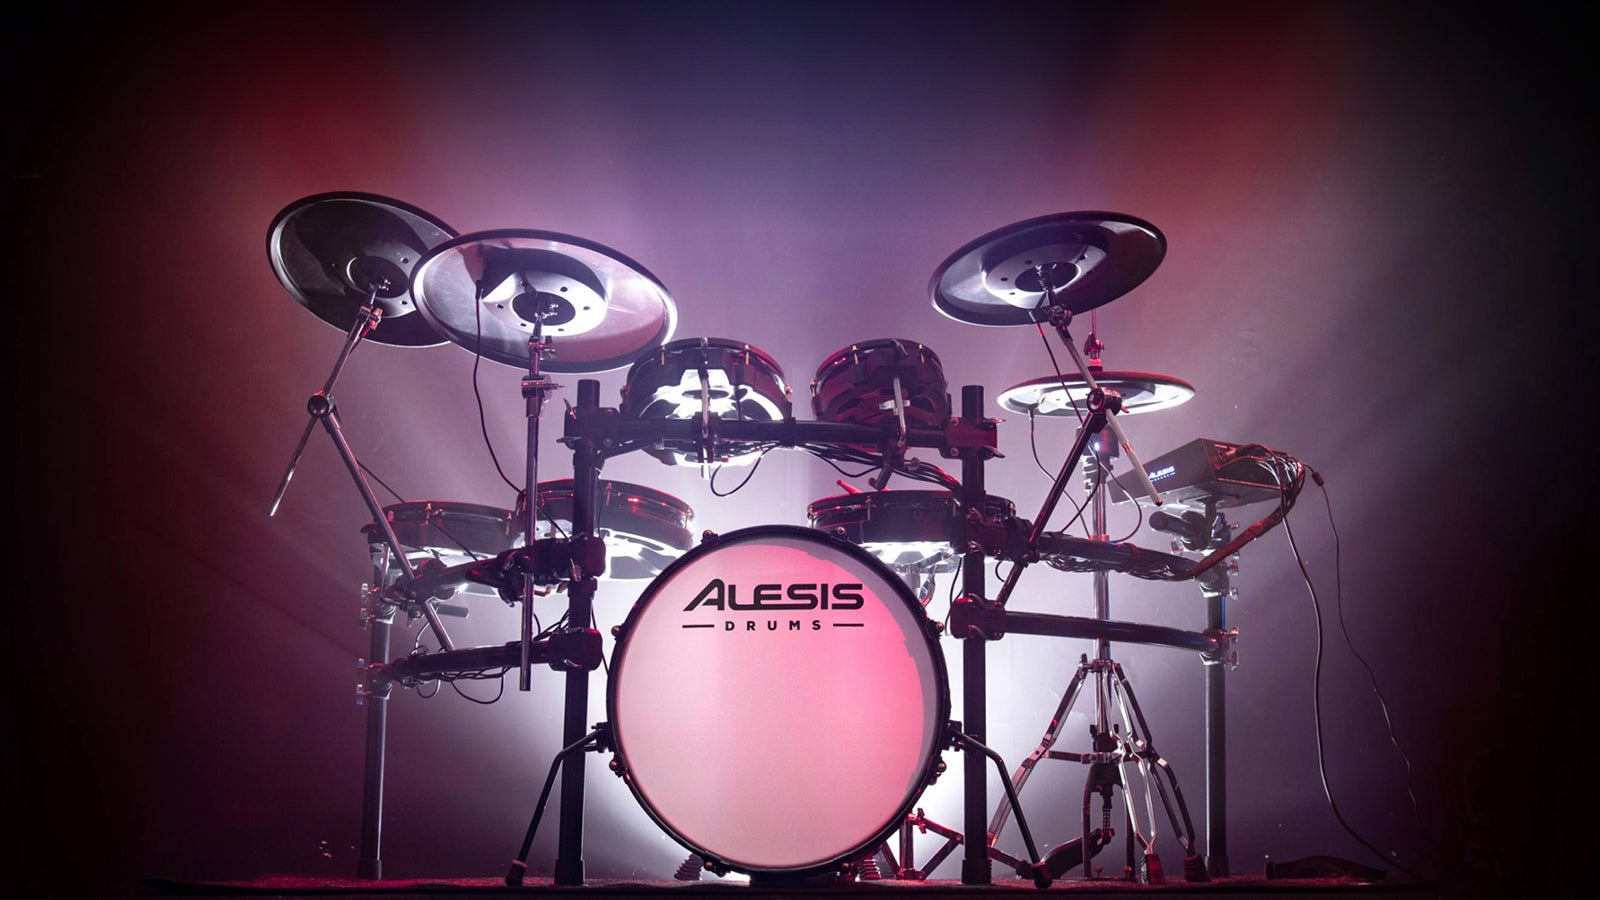 An Alesis Strata Prime lit up on stage